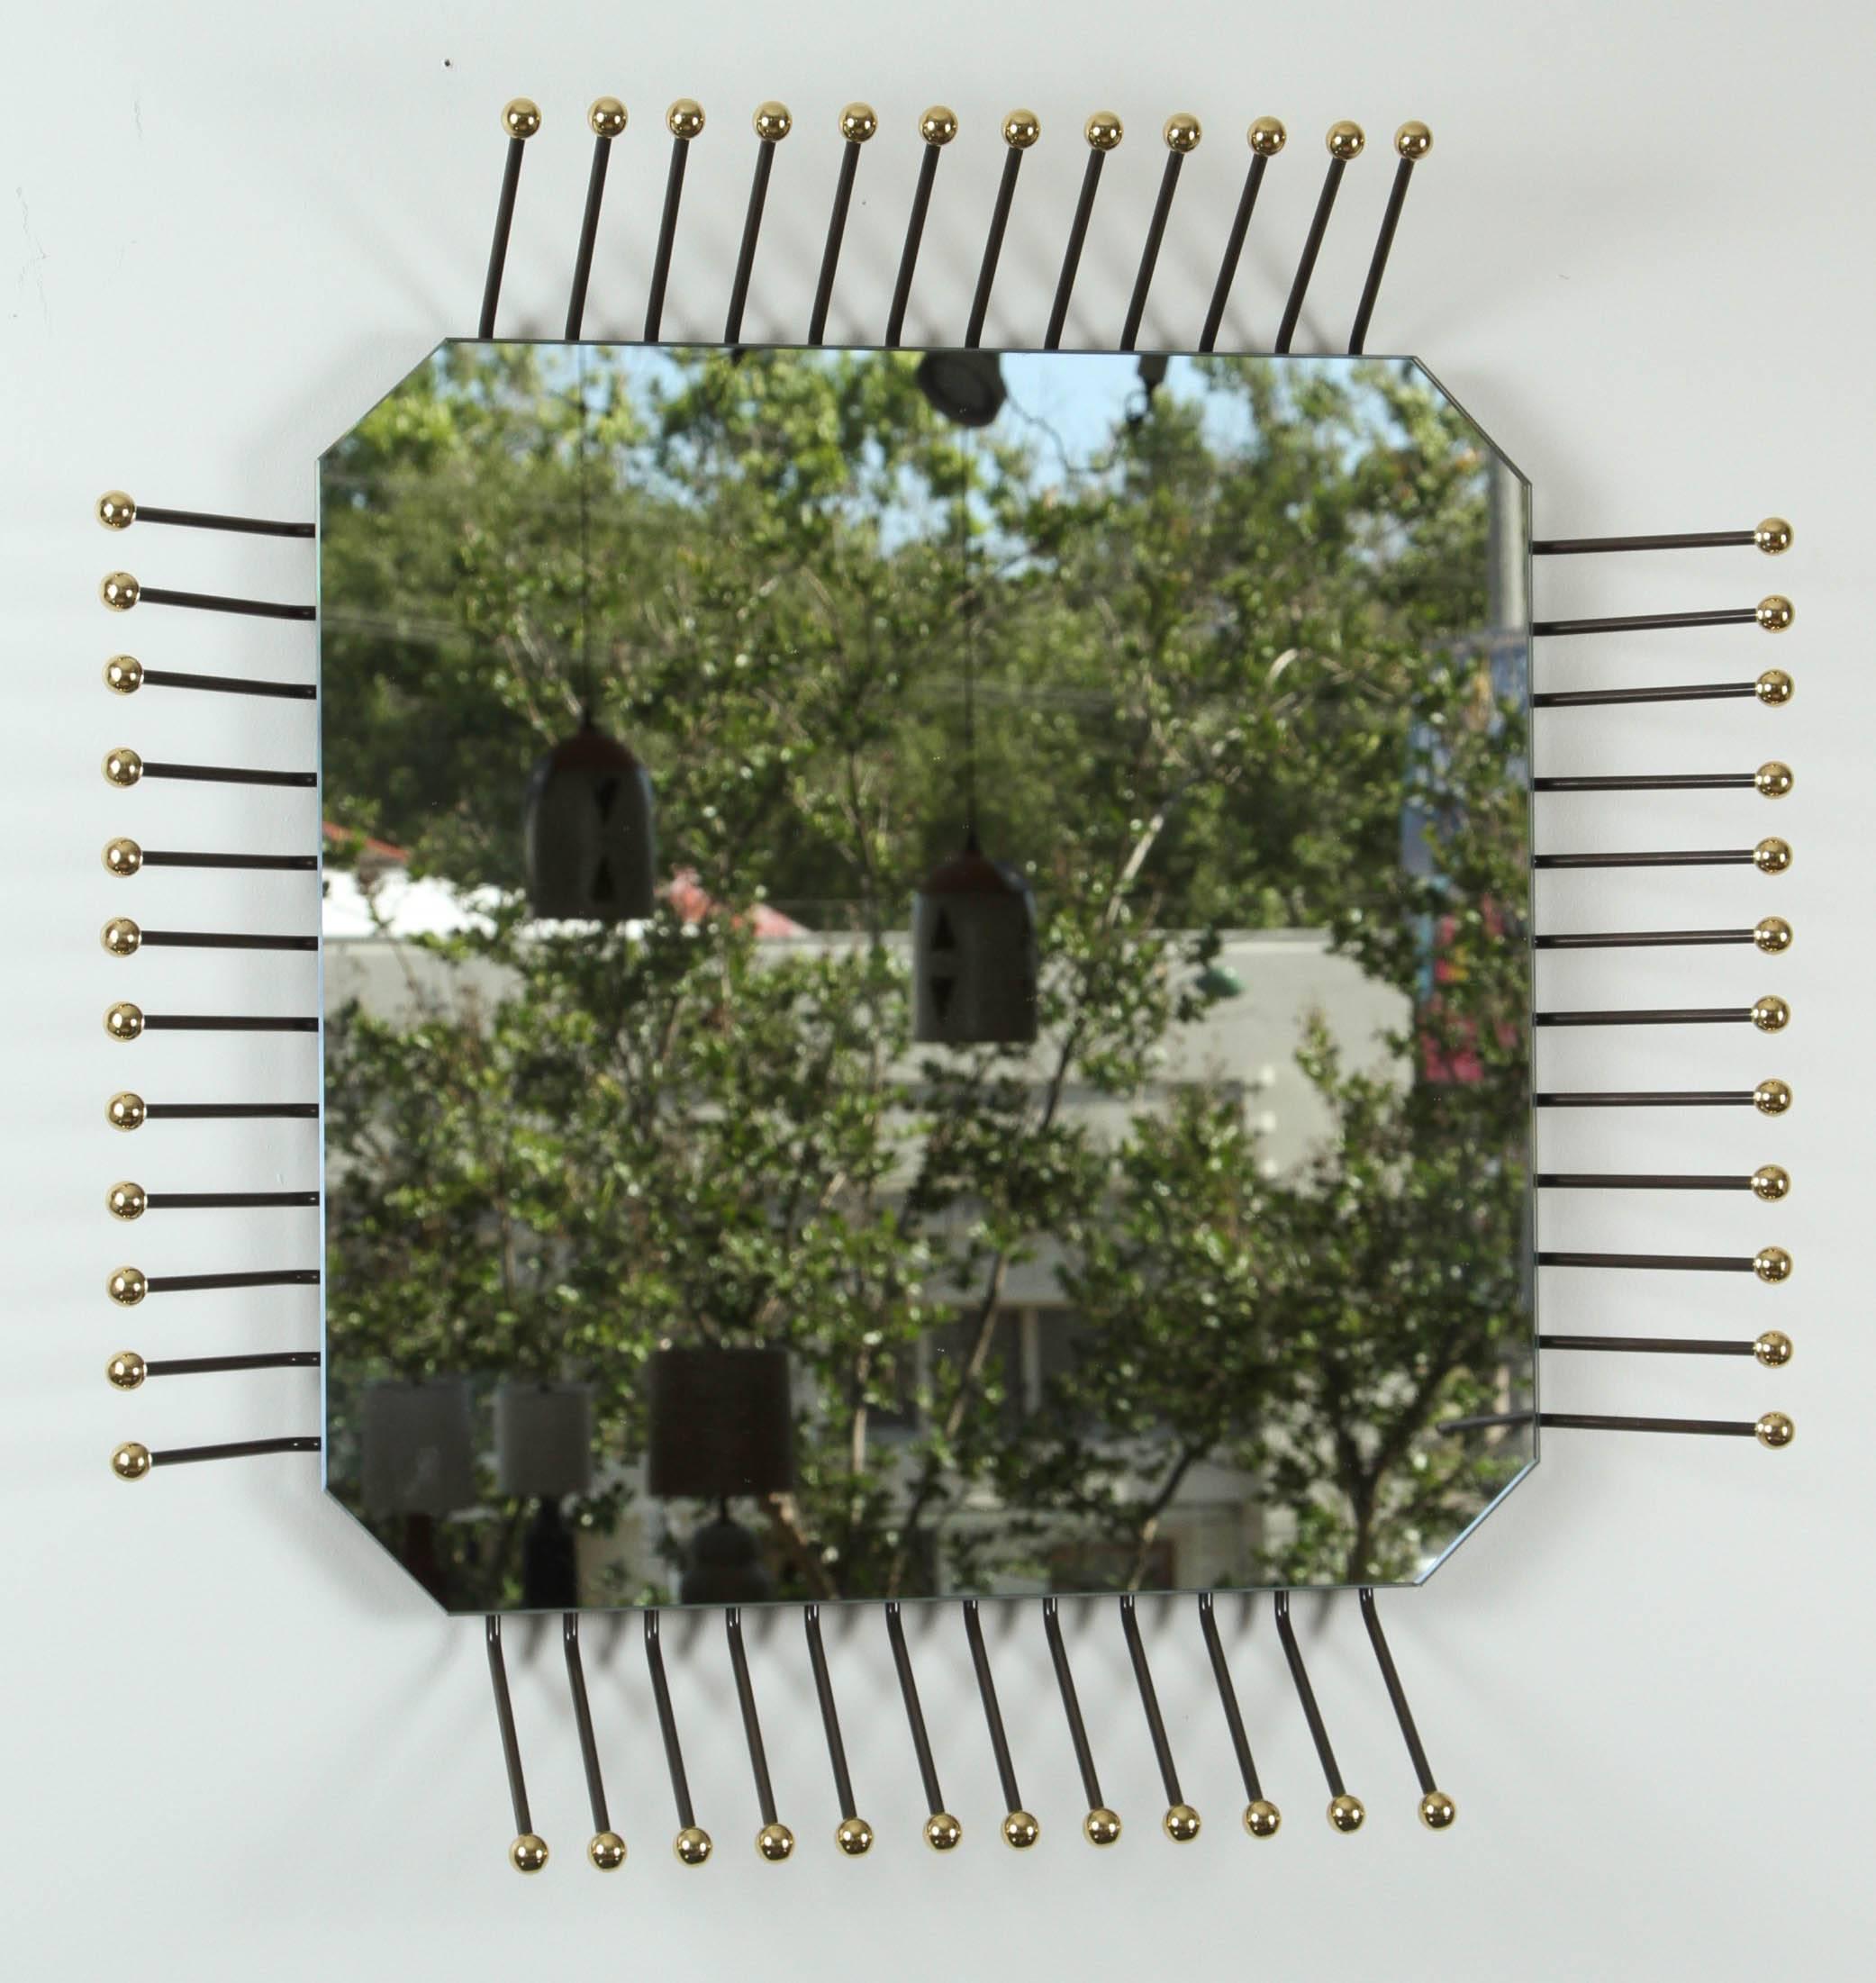 Motherboard square mirror by Collection Particuliere.